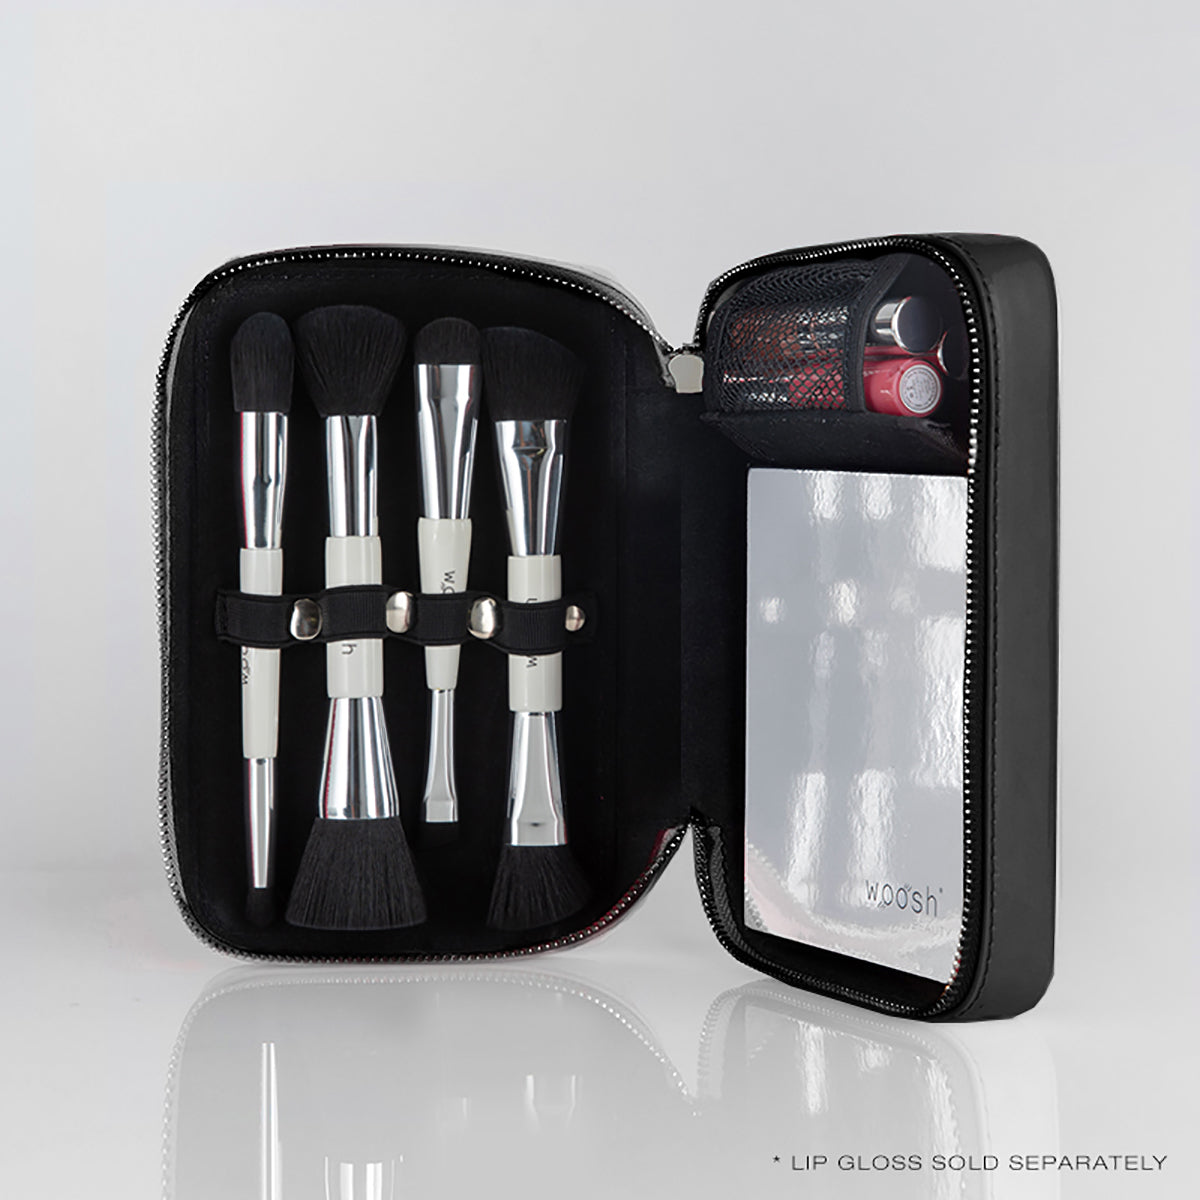 Black Fold Out Case can hold: 4 essential brushes, 3 lip glosses, and 1 fold out face palette